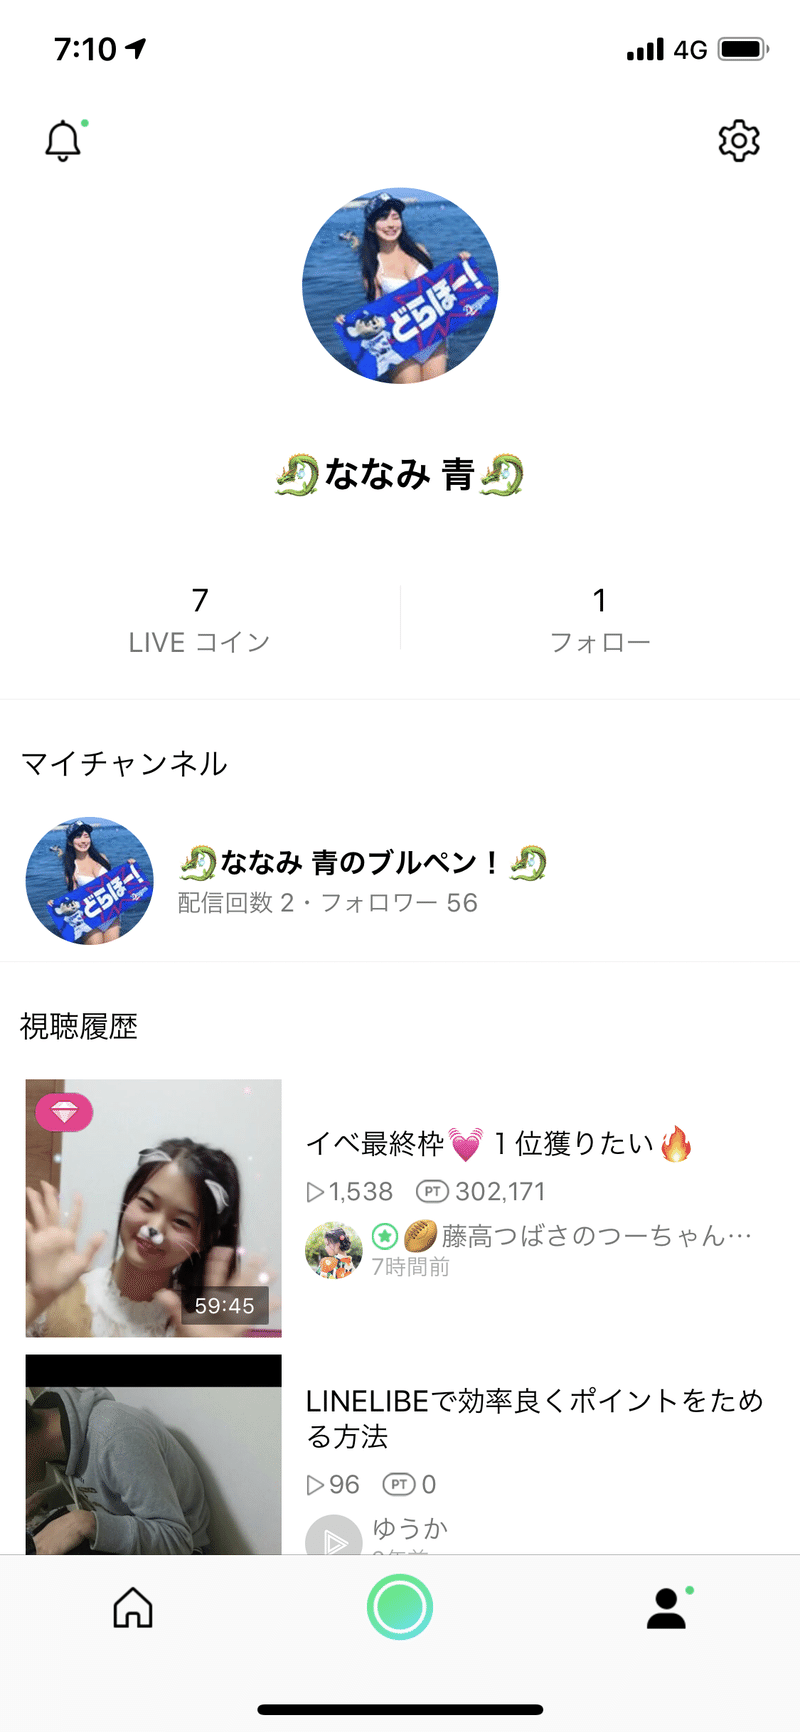 Line Live攻略法 視聴者side ななみ 青 Note